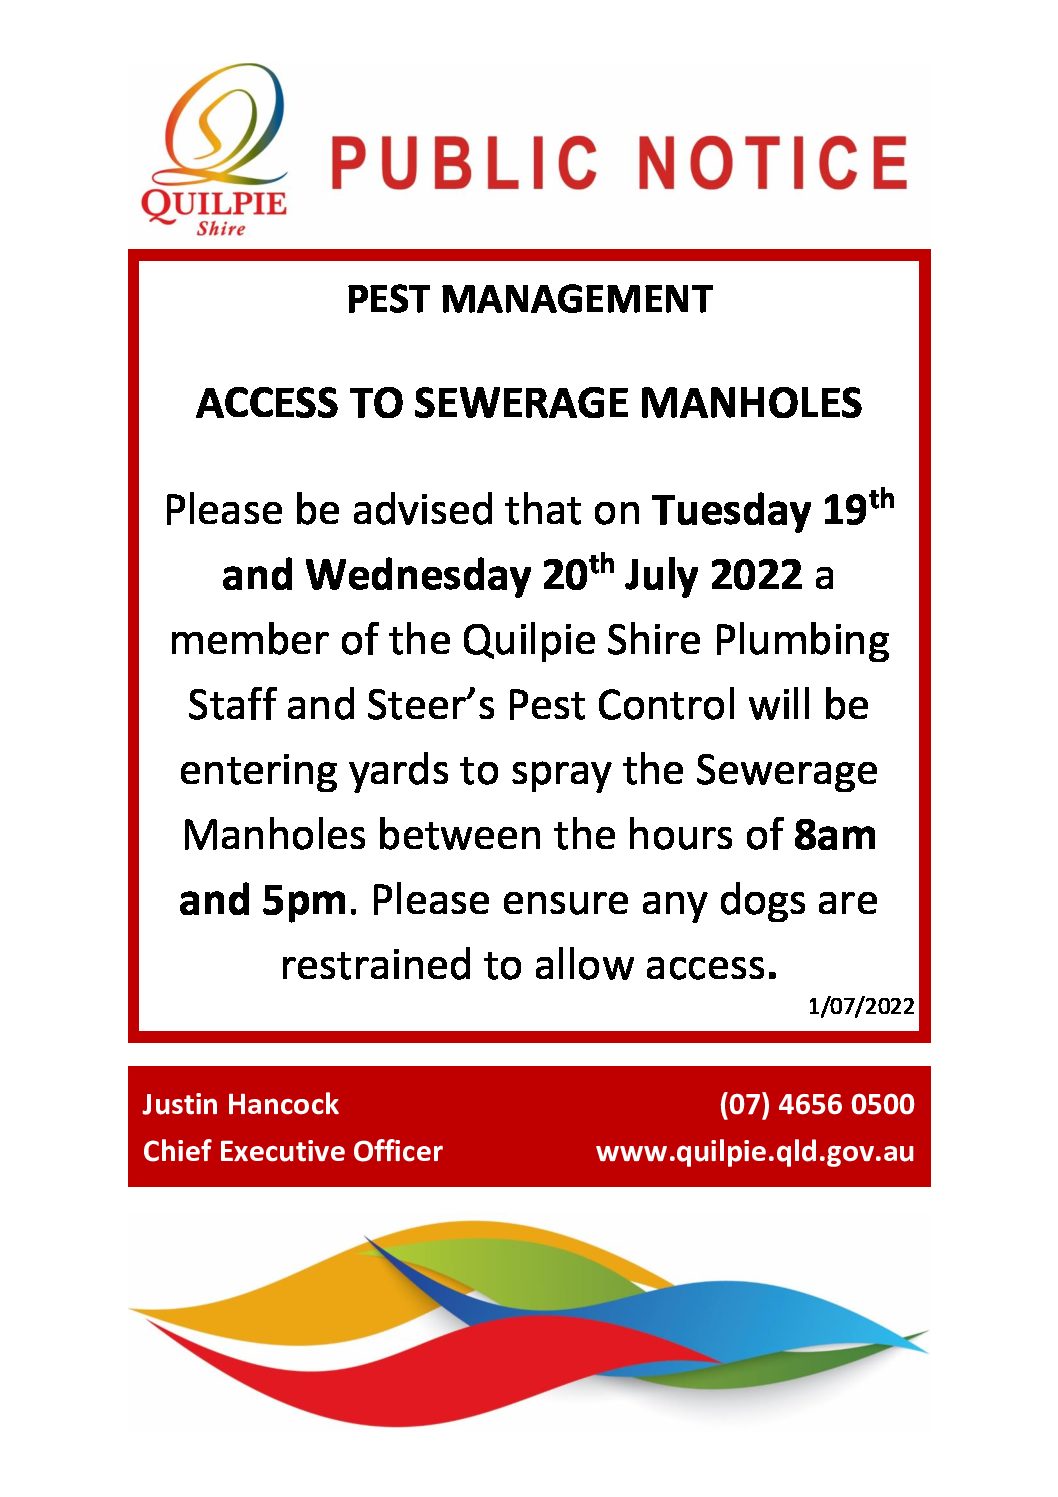 Access Required to Sewerage Manholes